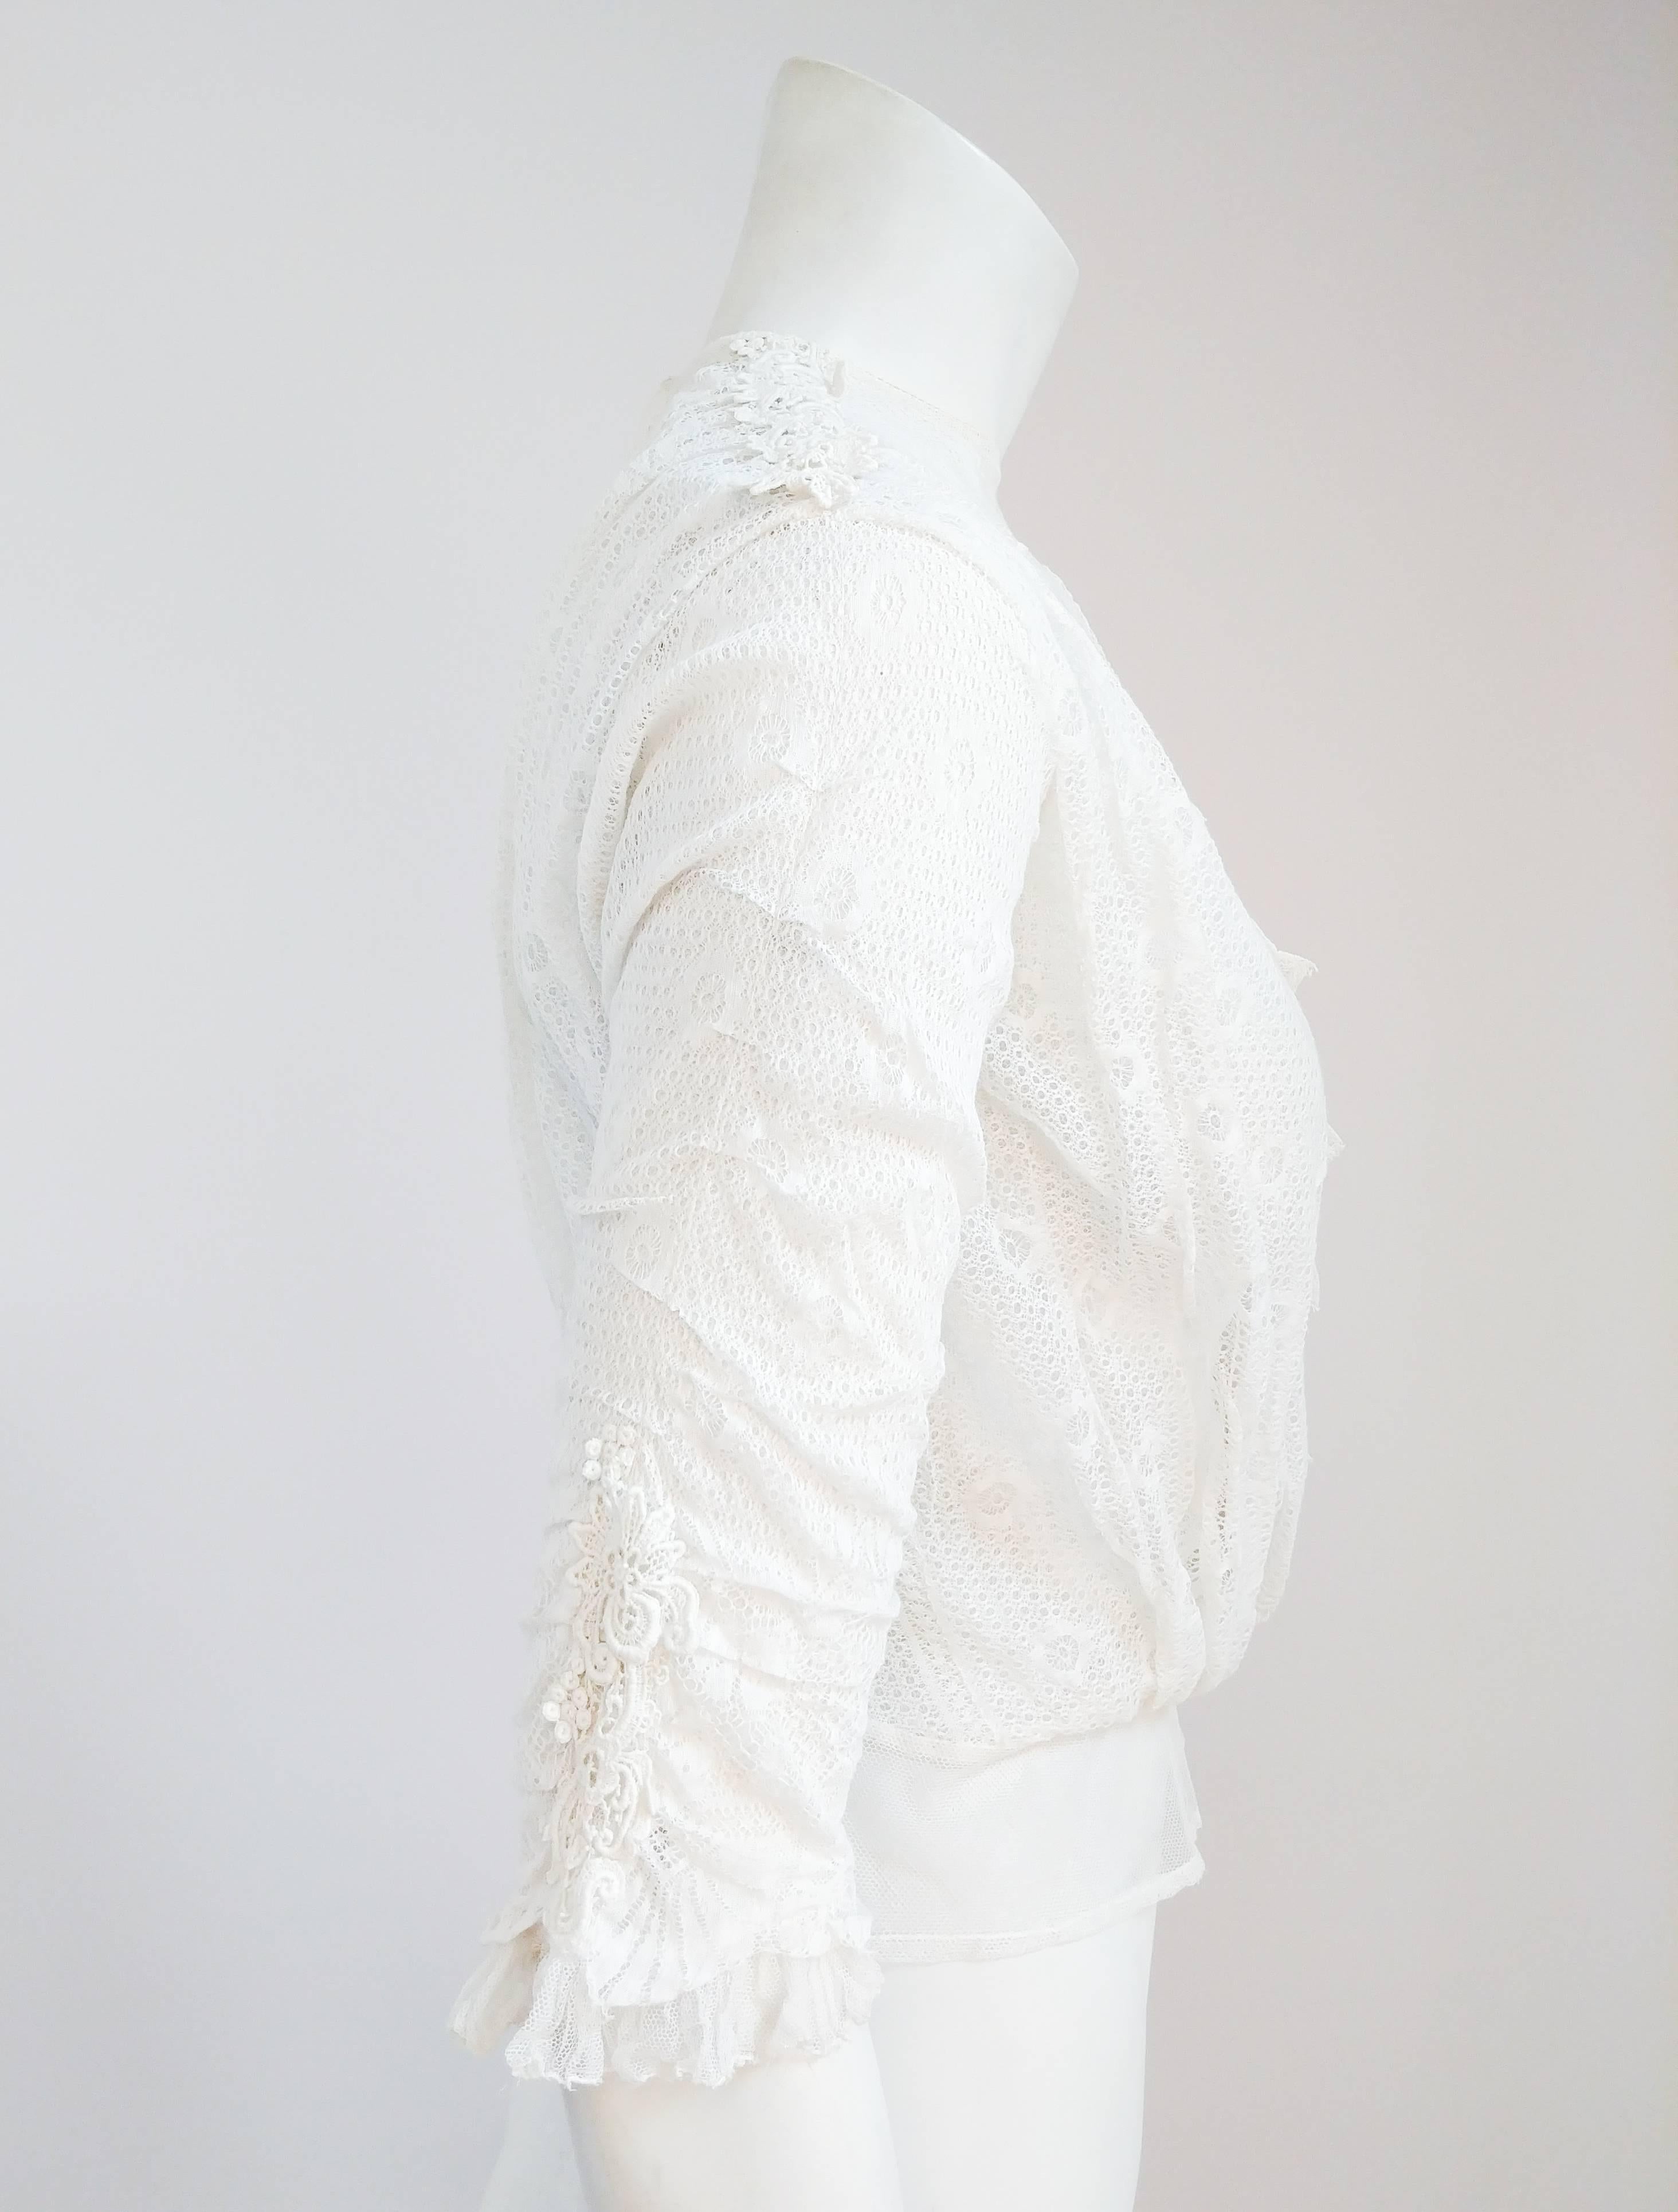 Edwardian White Lace Blouse. White lace blouse with mesh lining and neckline. Faux button up front and ruched sleeves with lace applique accents. Buttons up the back.